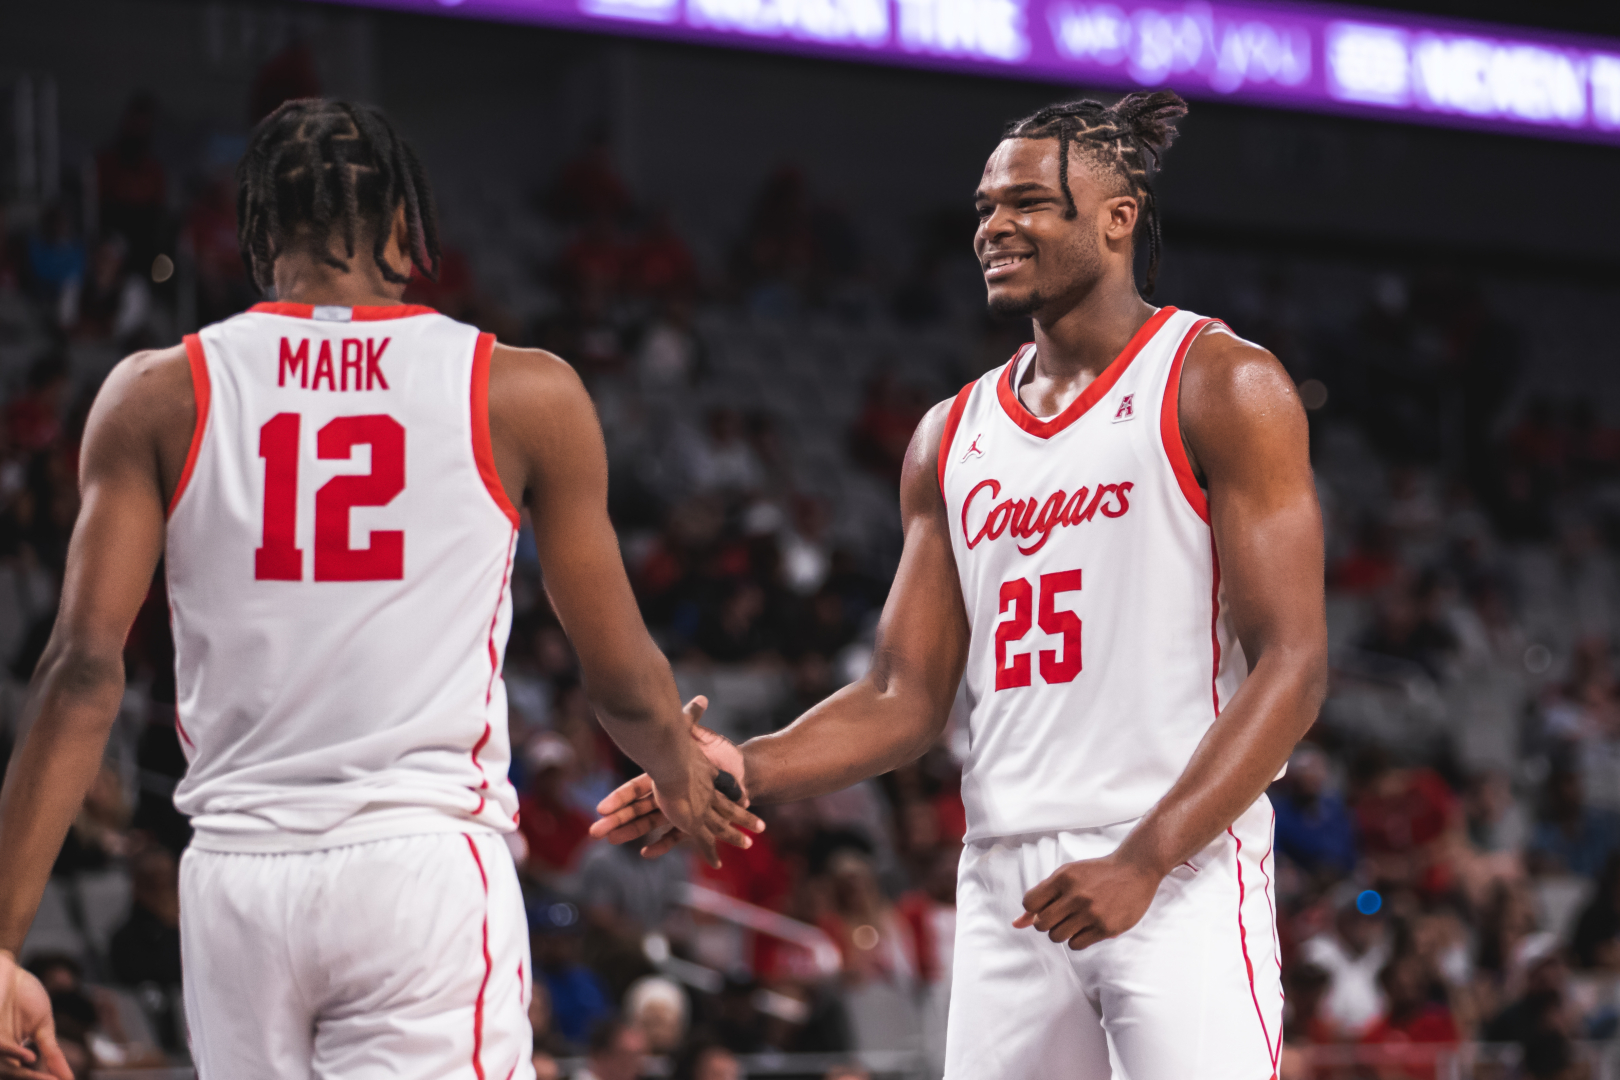 No one has been better on the road in the 2022-23 season than UH basketball. | Sean Thomas/Contributor